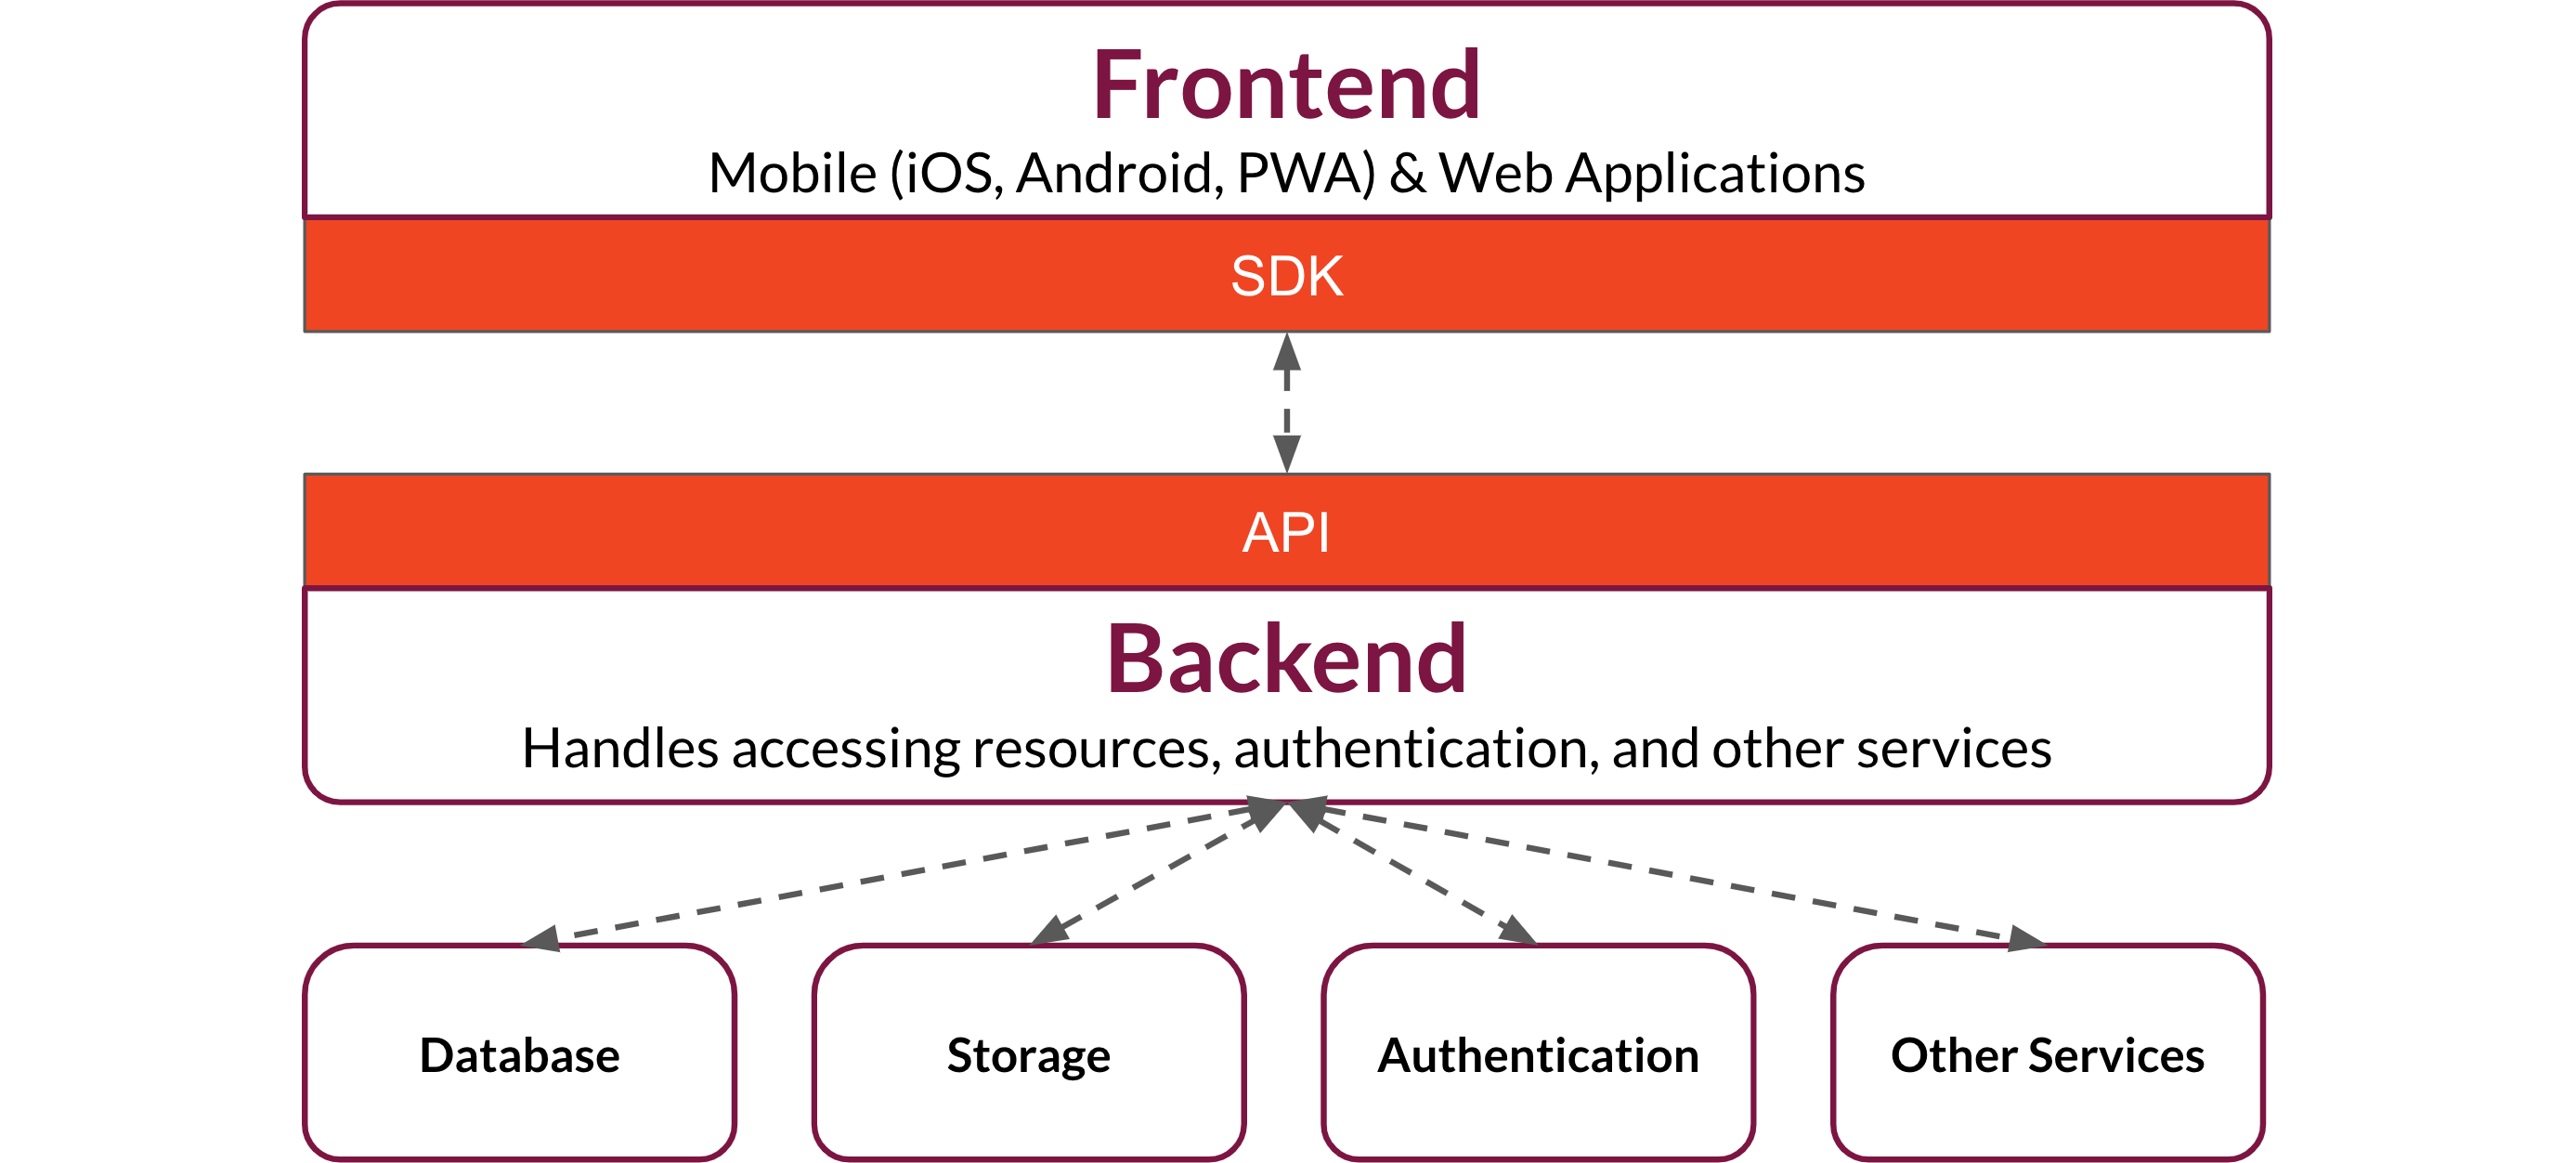 Basic architecture of a BaaS: a front end interacting with a backend through an exposed API